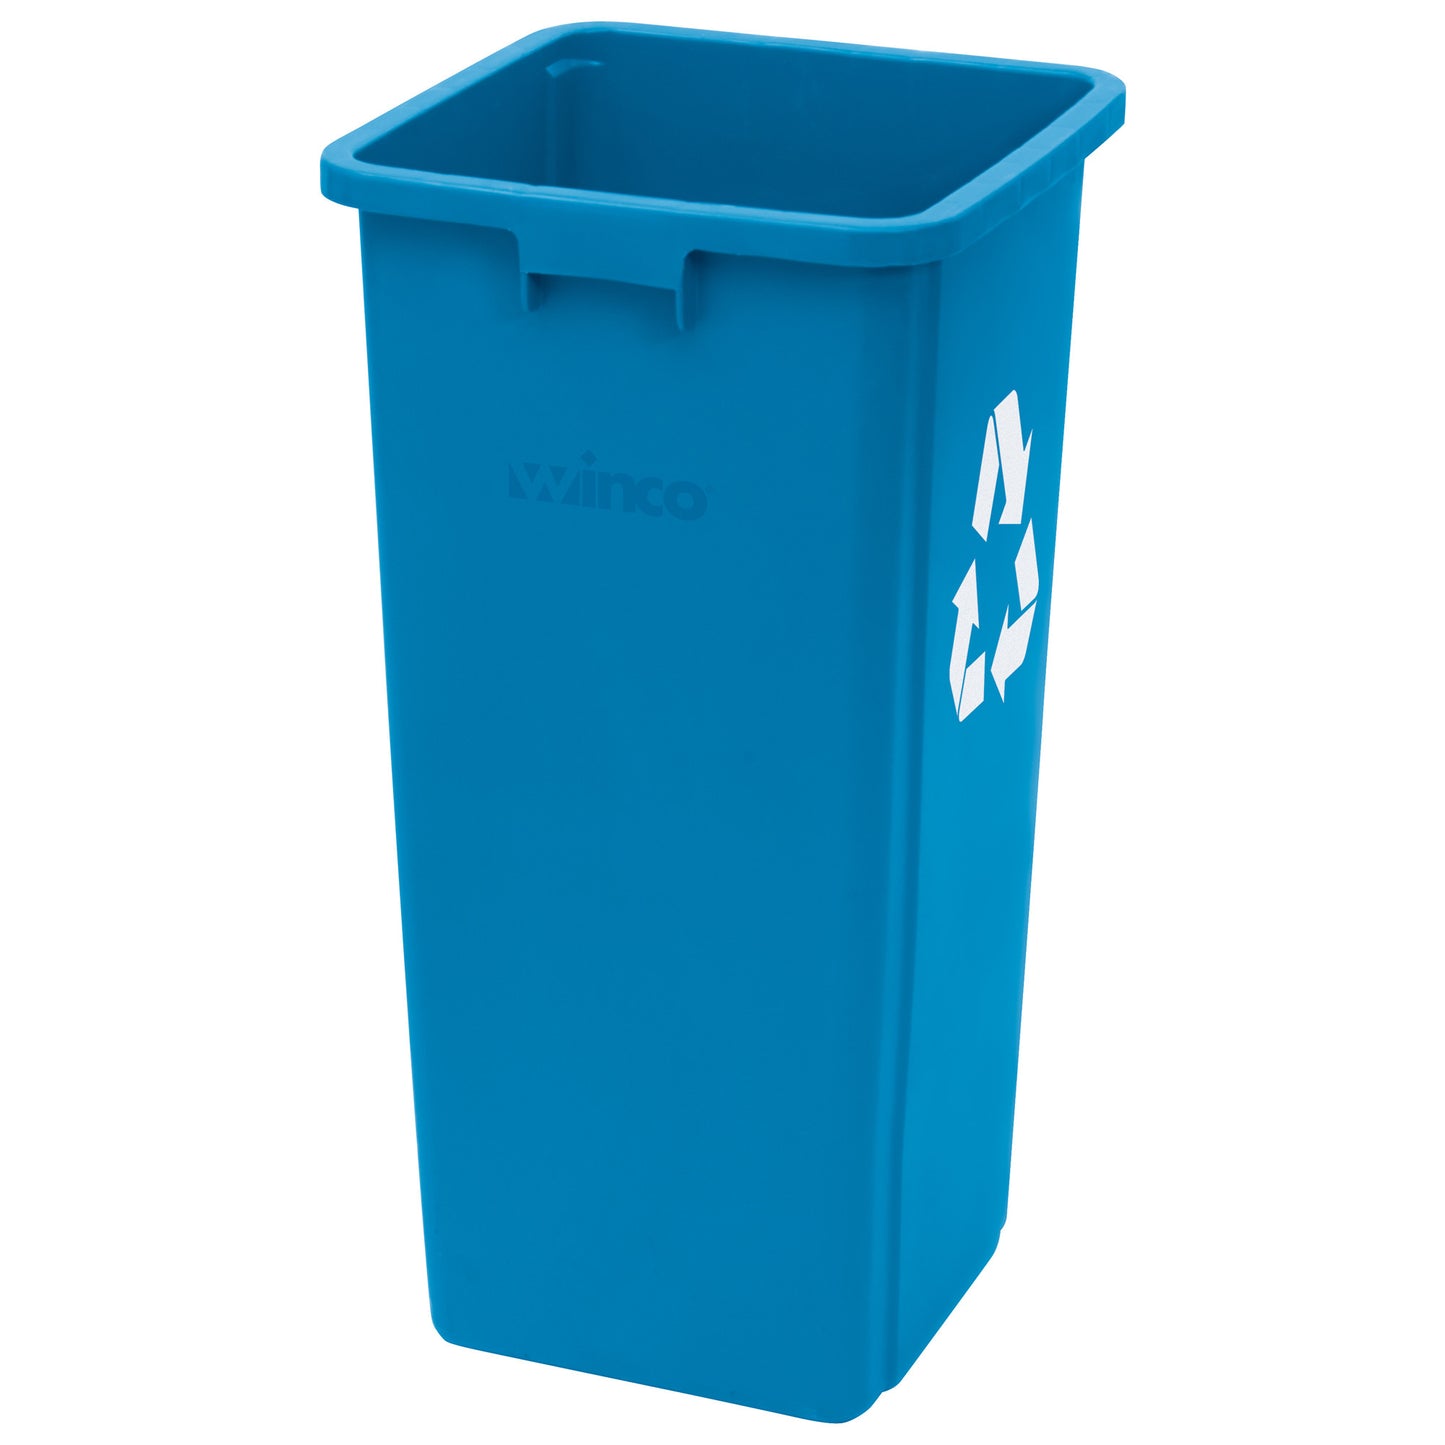 PTCS-23L - Tall Square Trash Can - 23 Gallon, Blue-Recycle